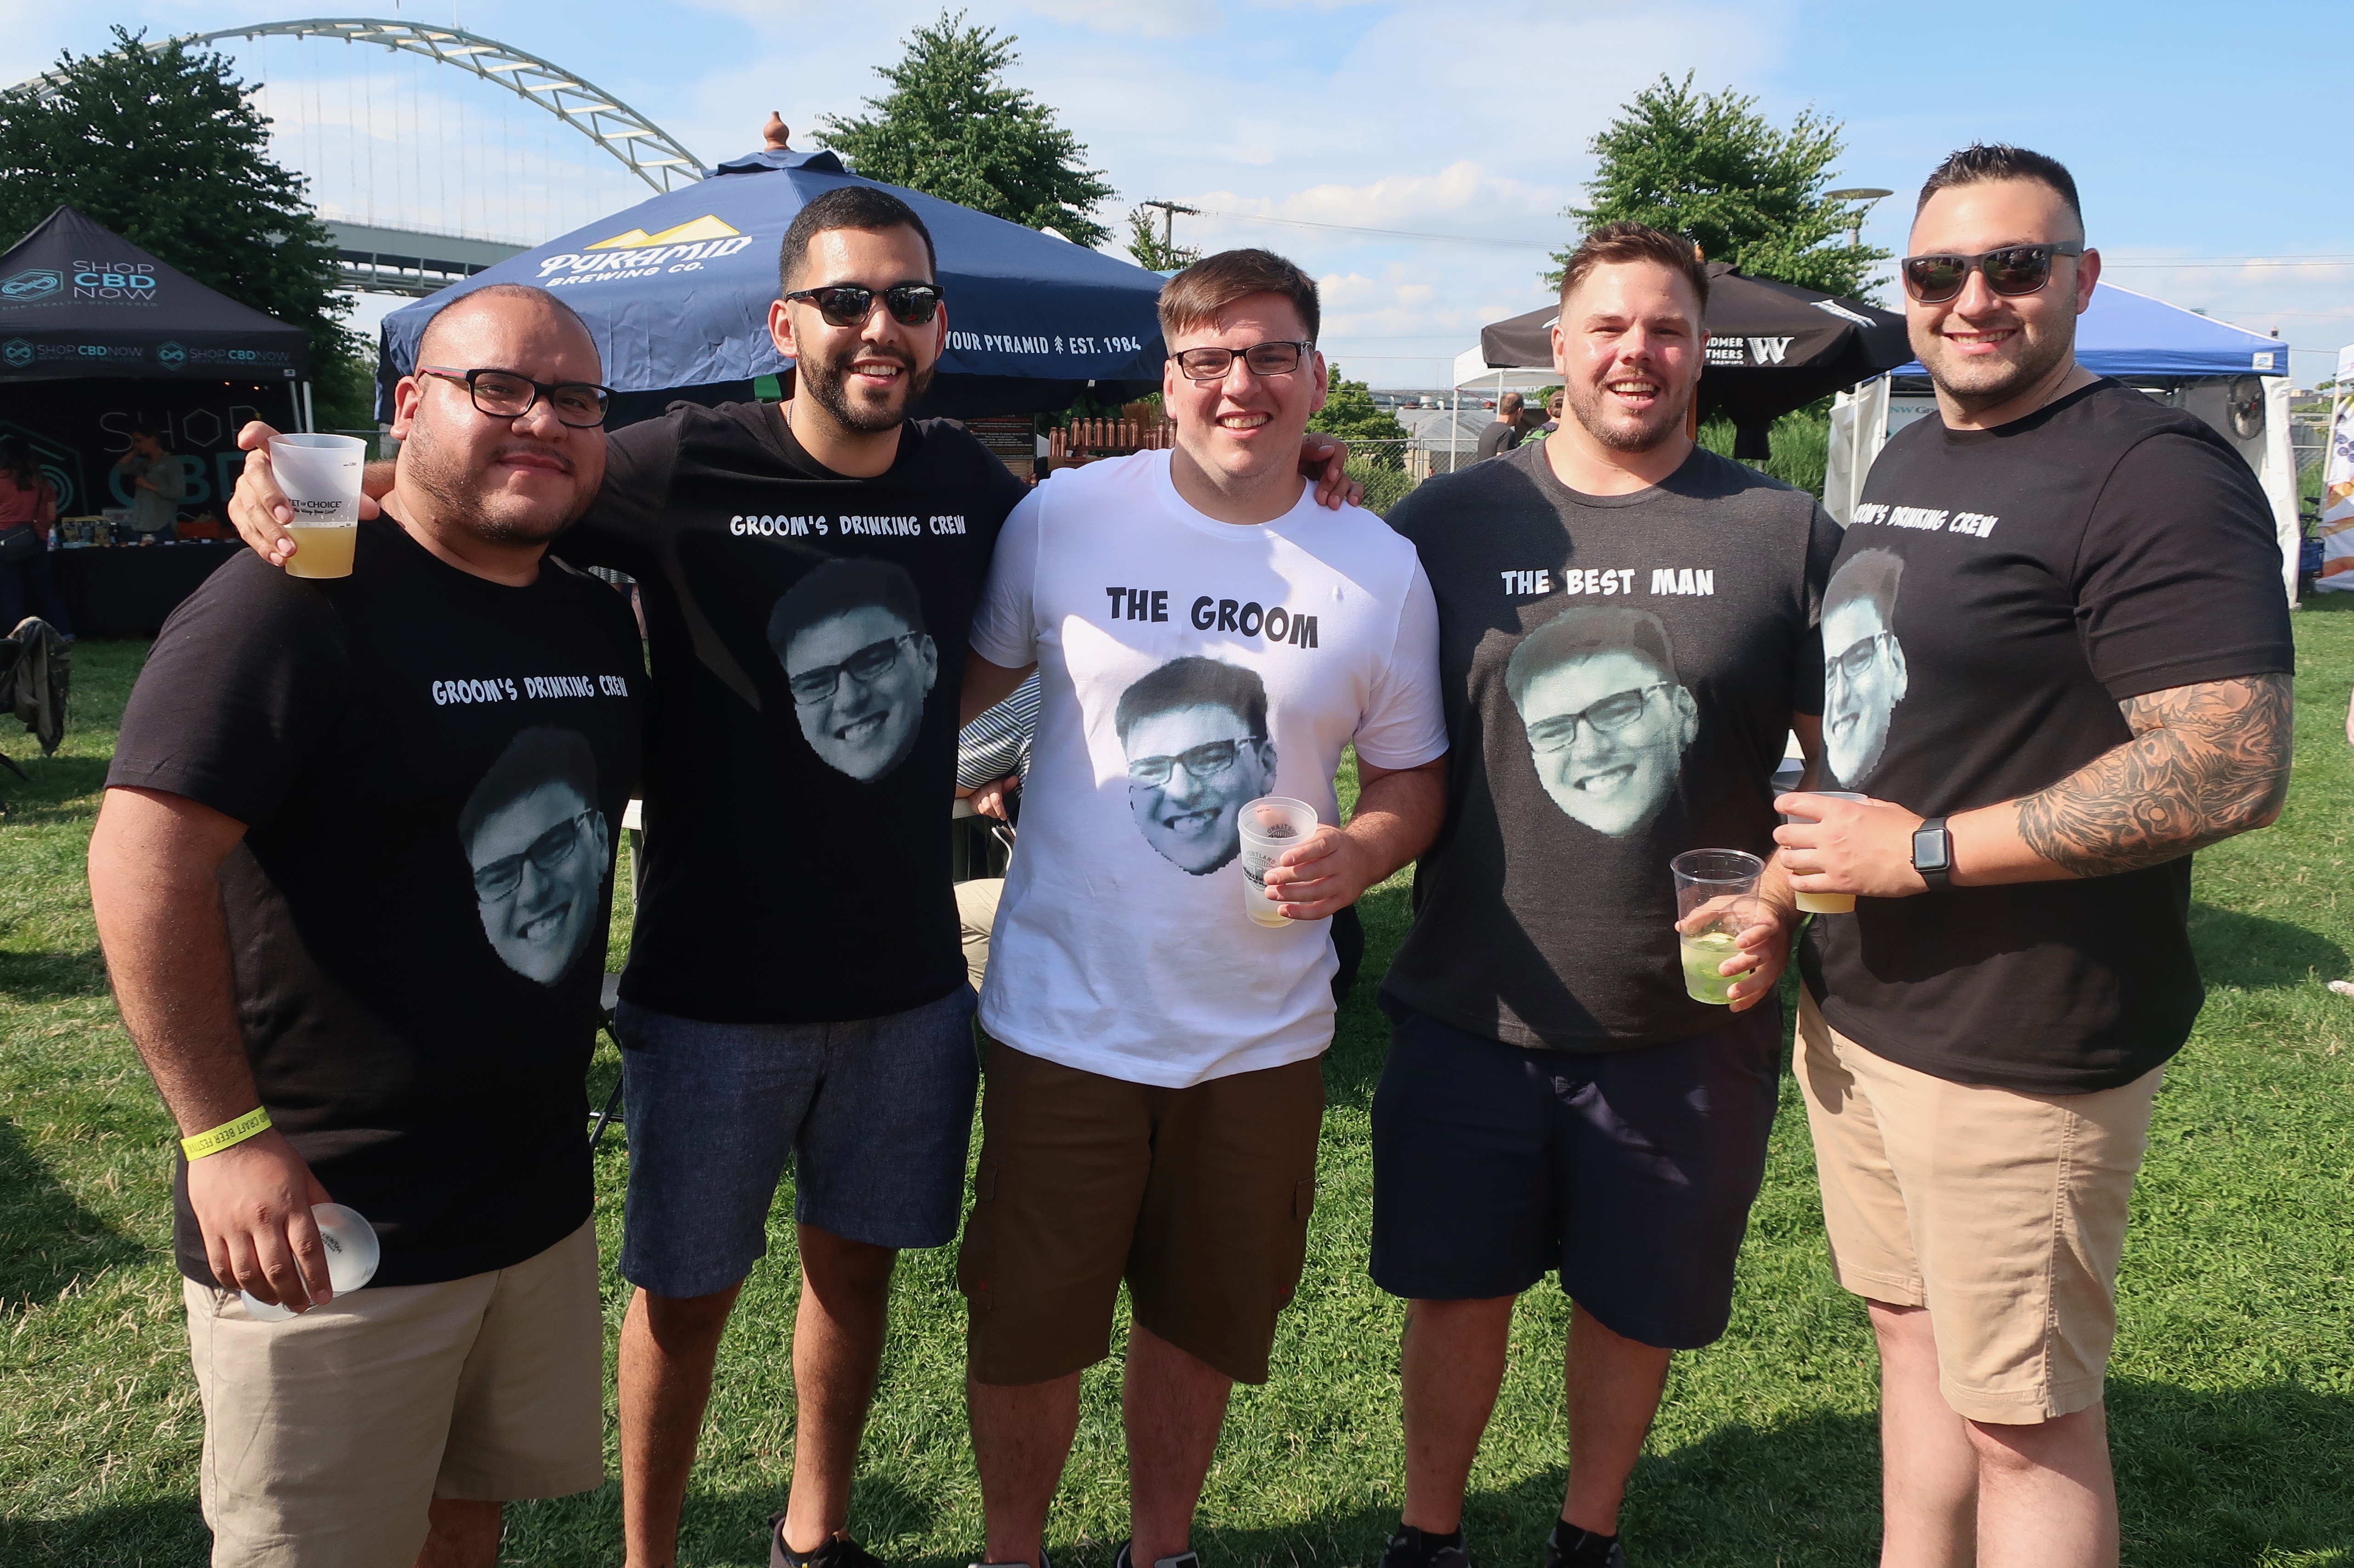 A bachelor party made the trek from New Jersey and attended the Portland Craft Beer Festival.